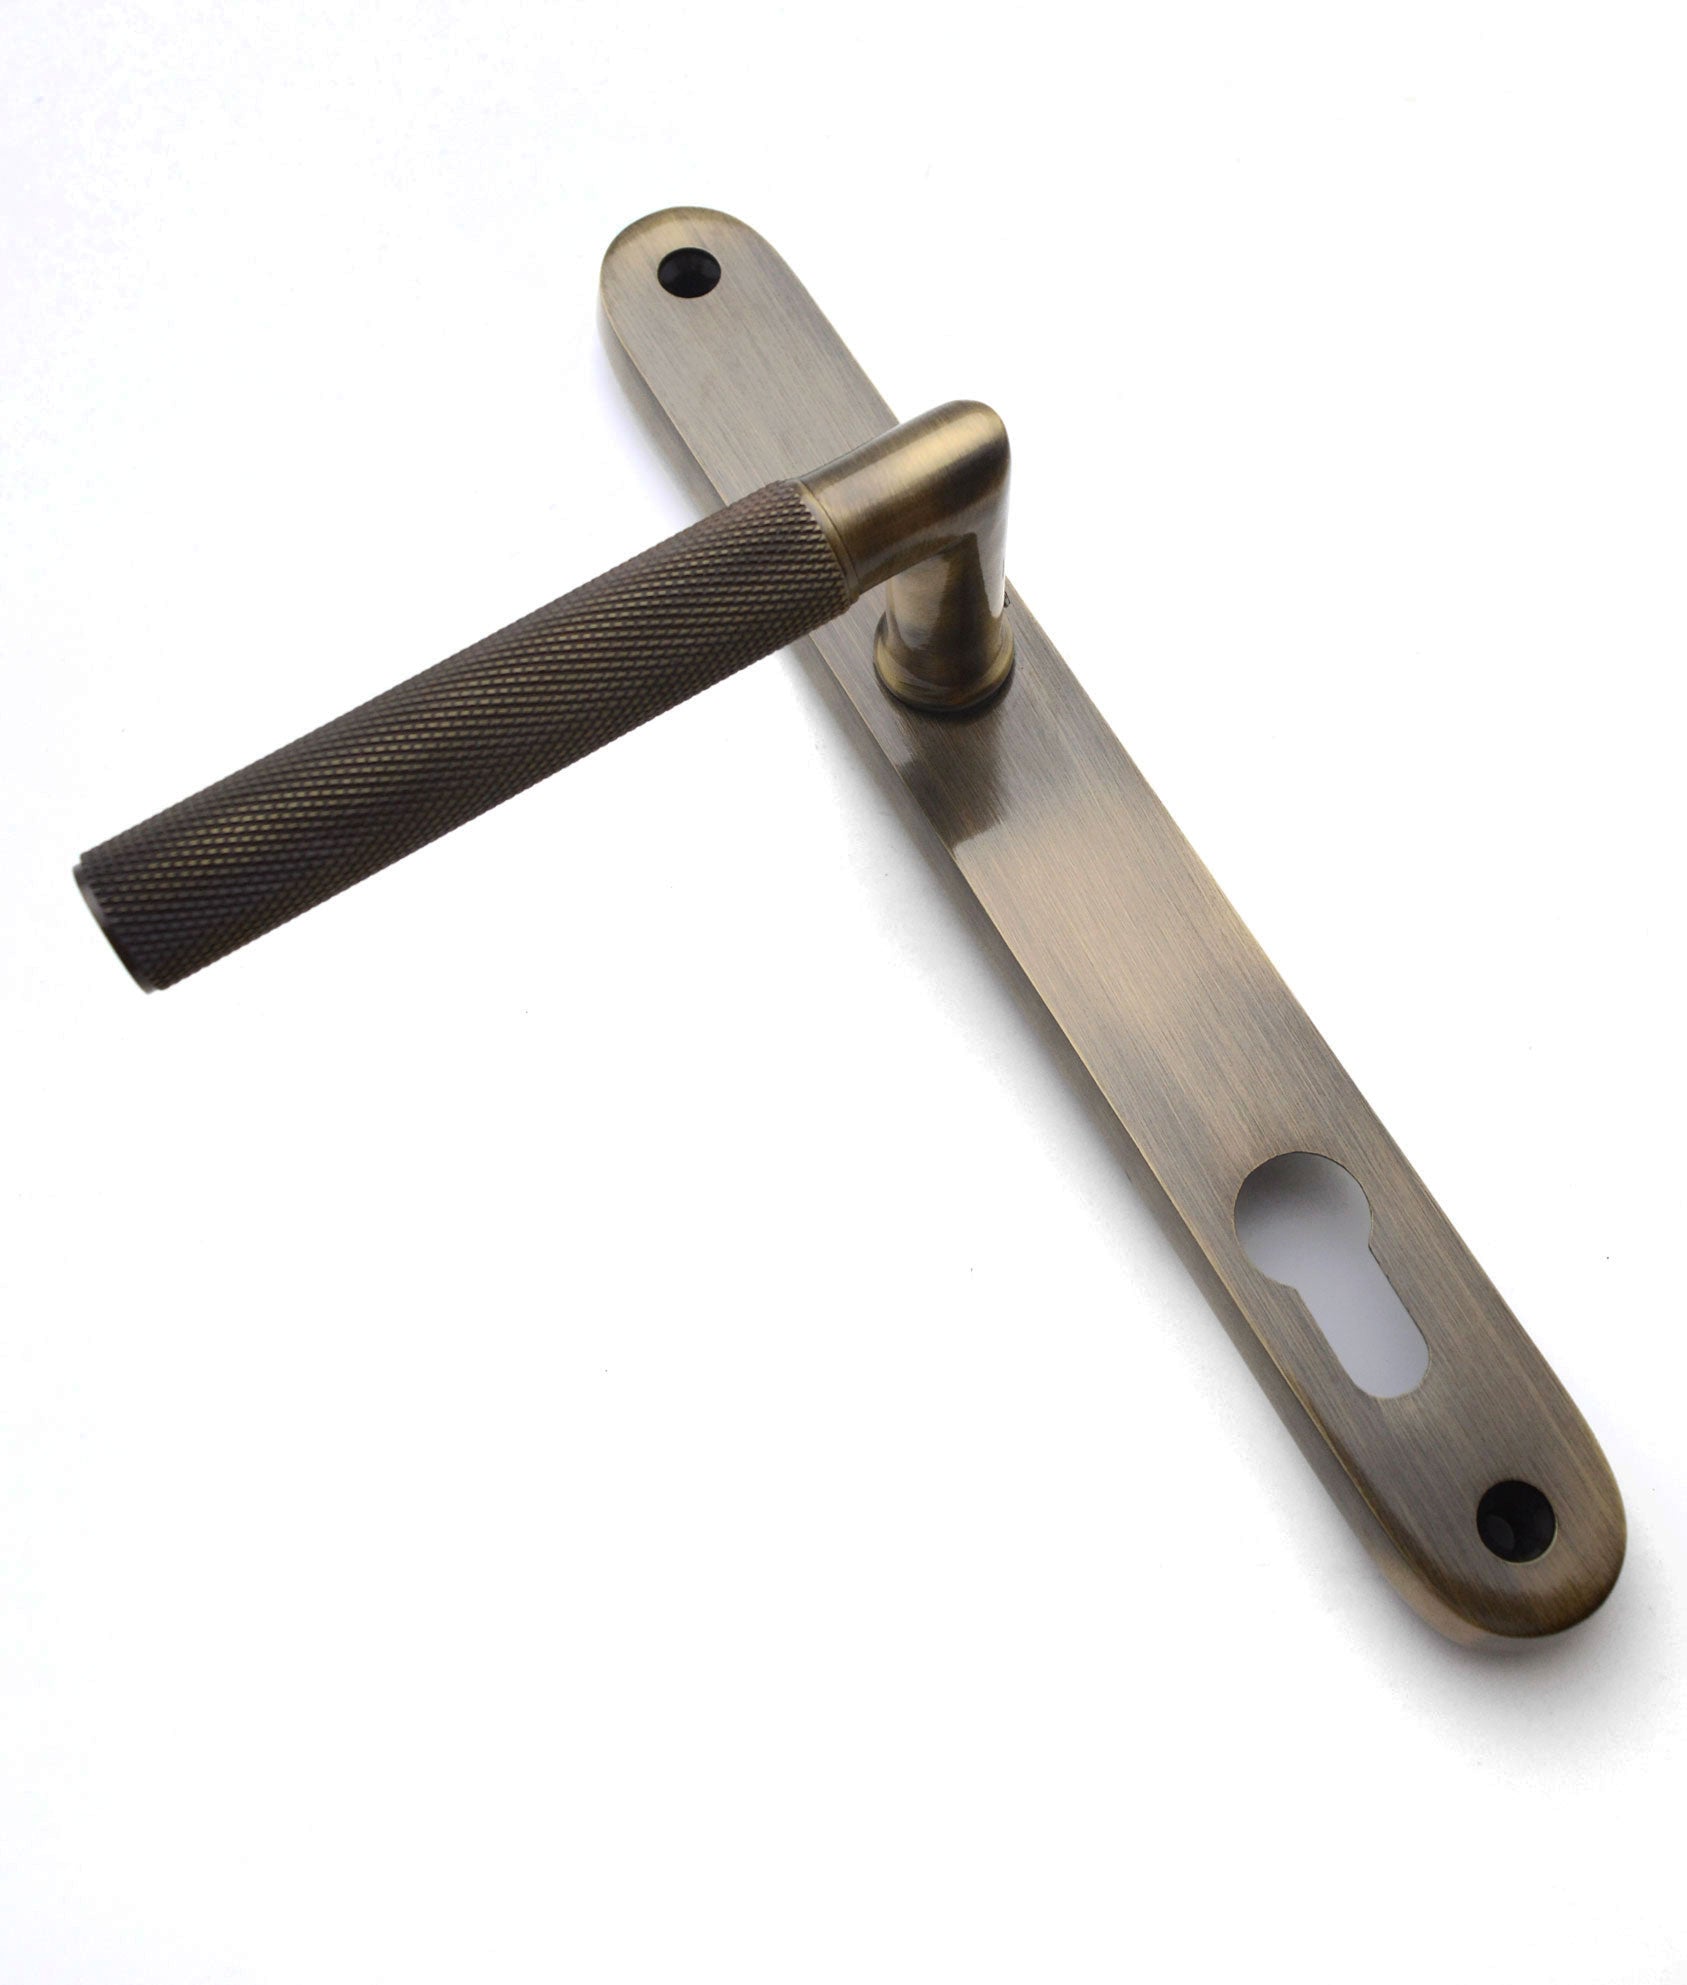 Lifton Knurled Lever Handle for Multipoint Lock